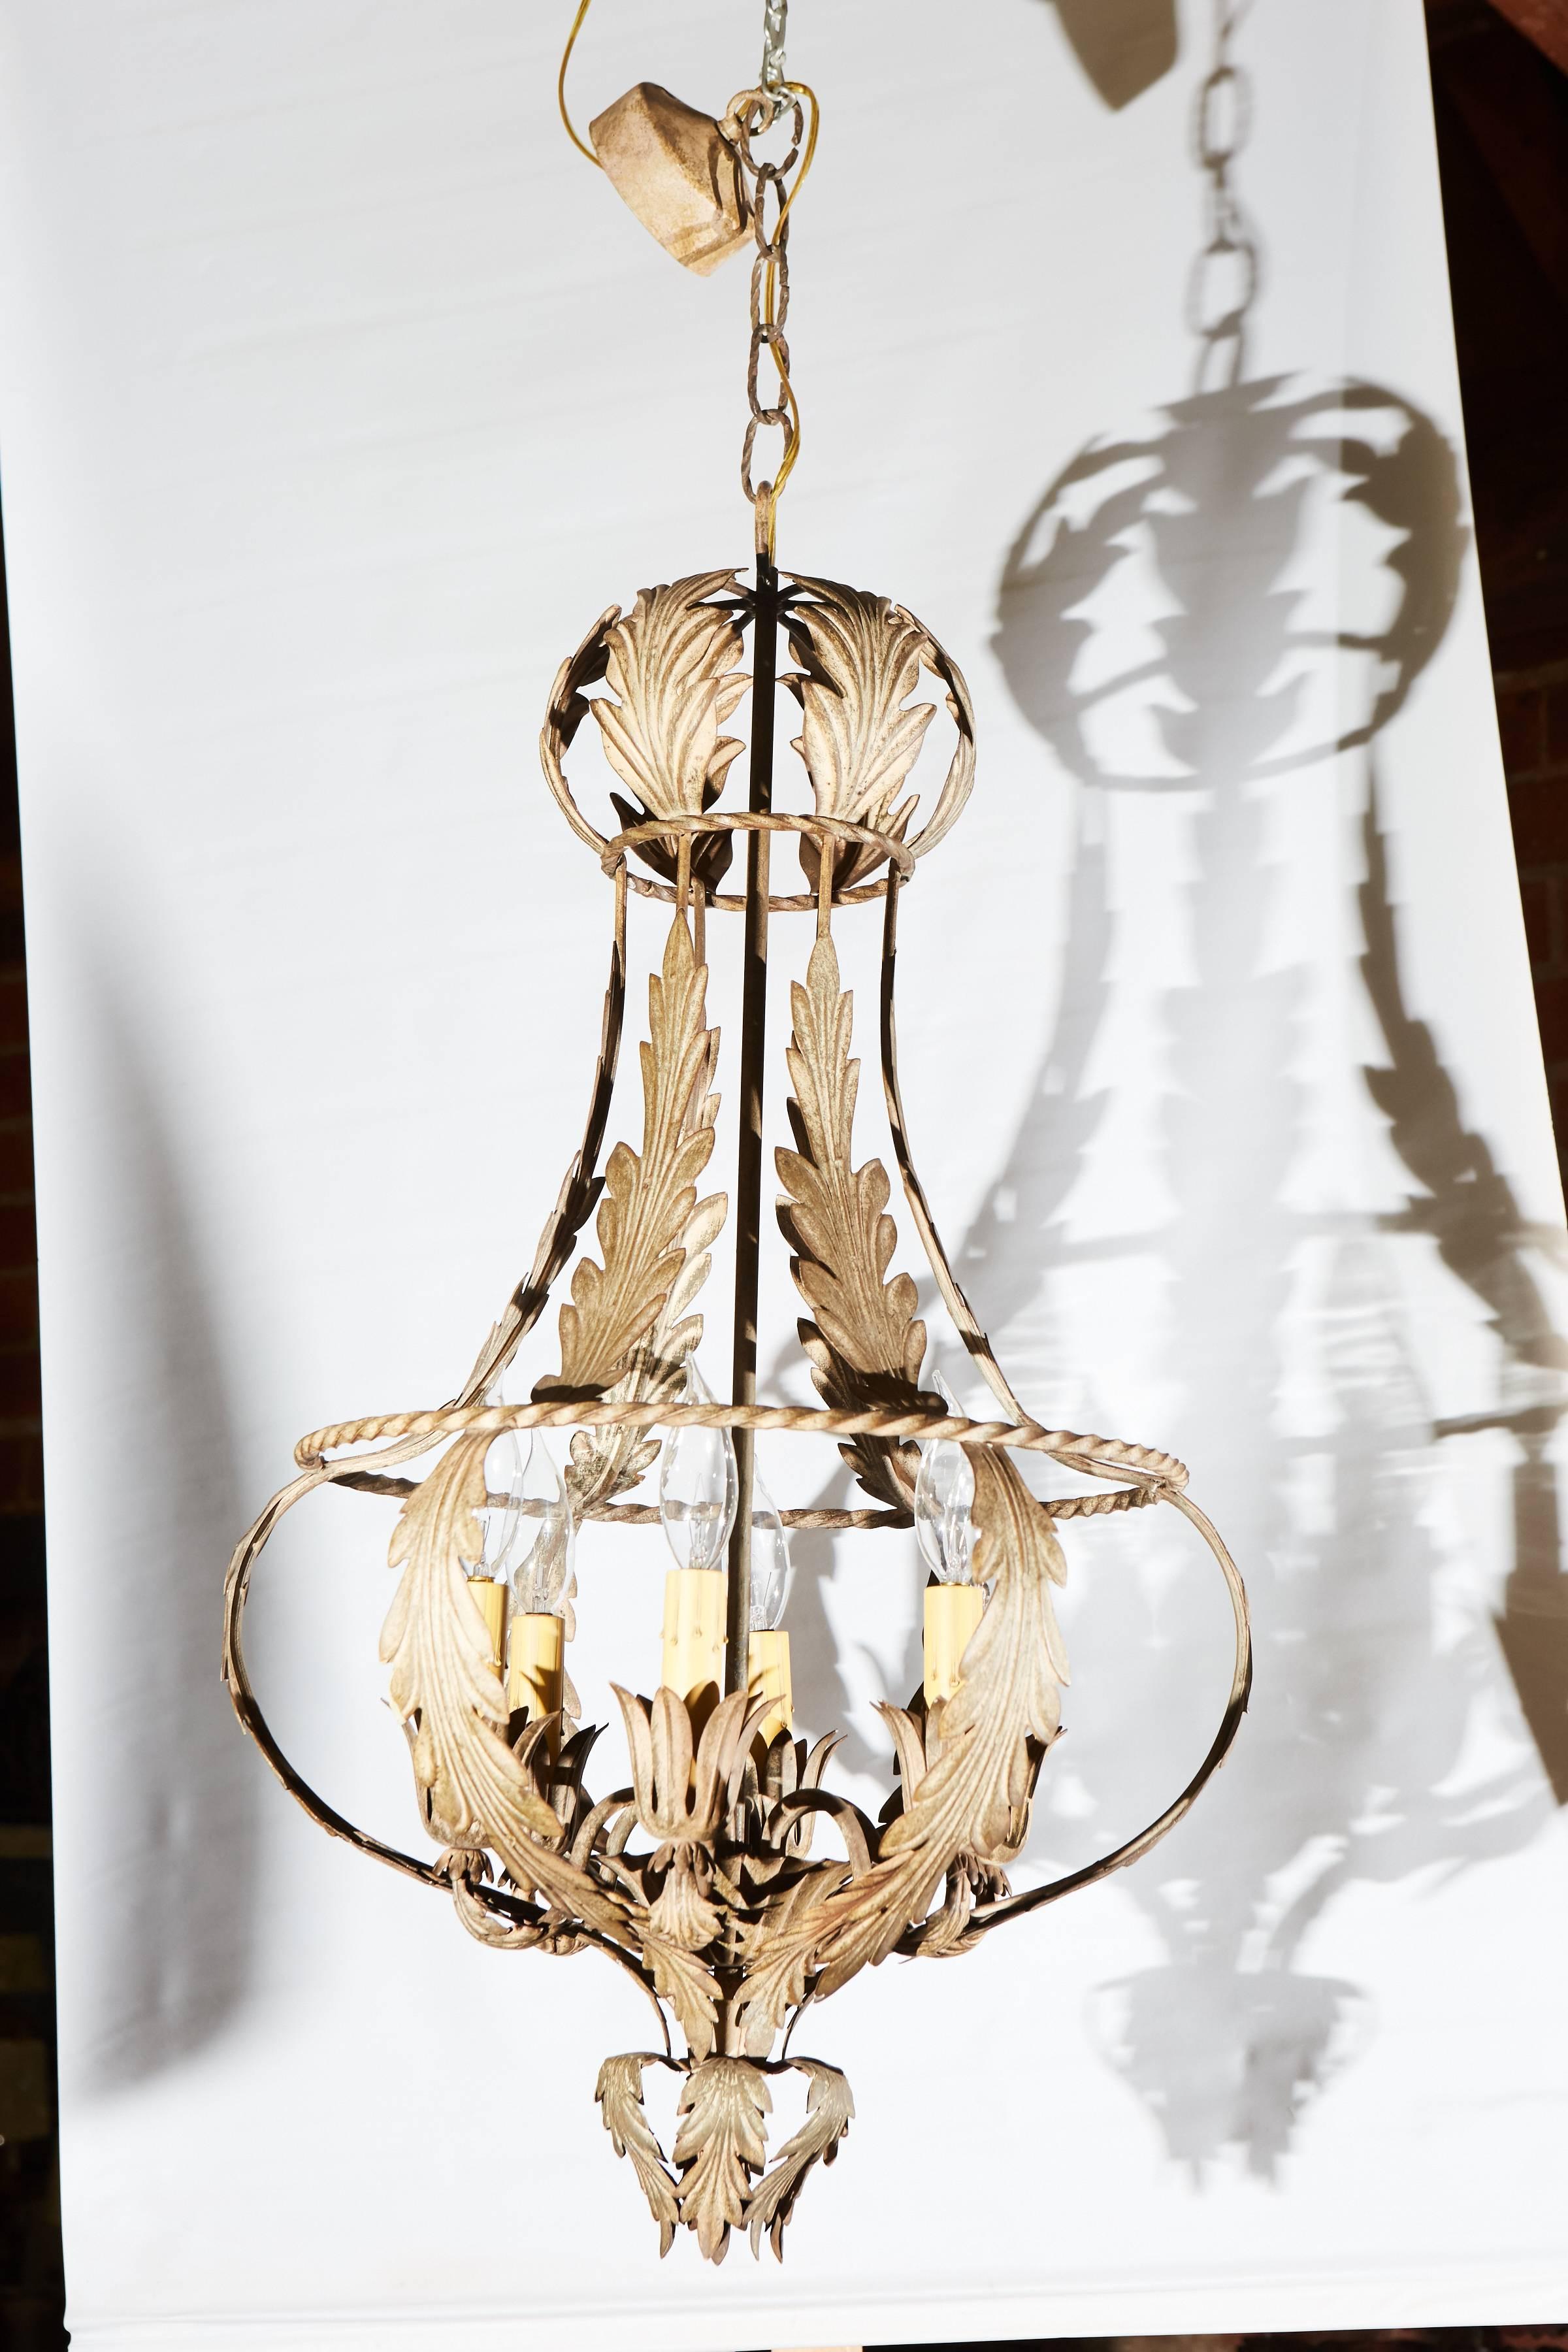 This is an Italian Mid-Century chandelier with six candle stick lights. The shape is round and decorated with acanthus leaves and aged to perfection.